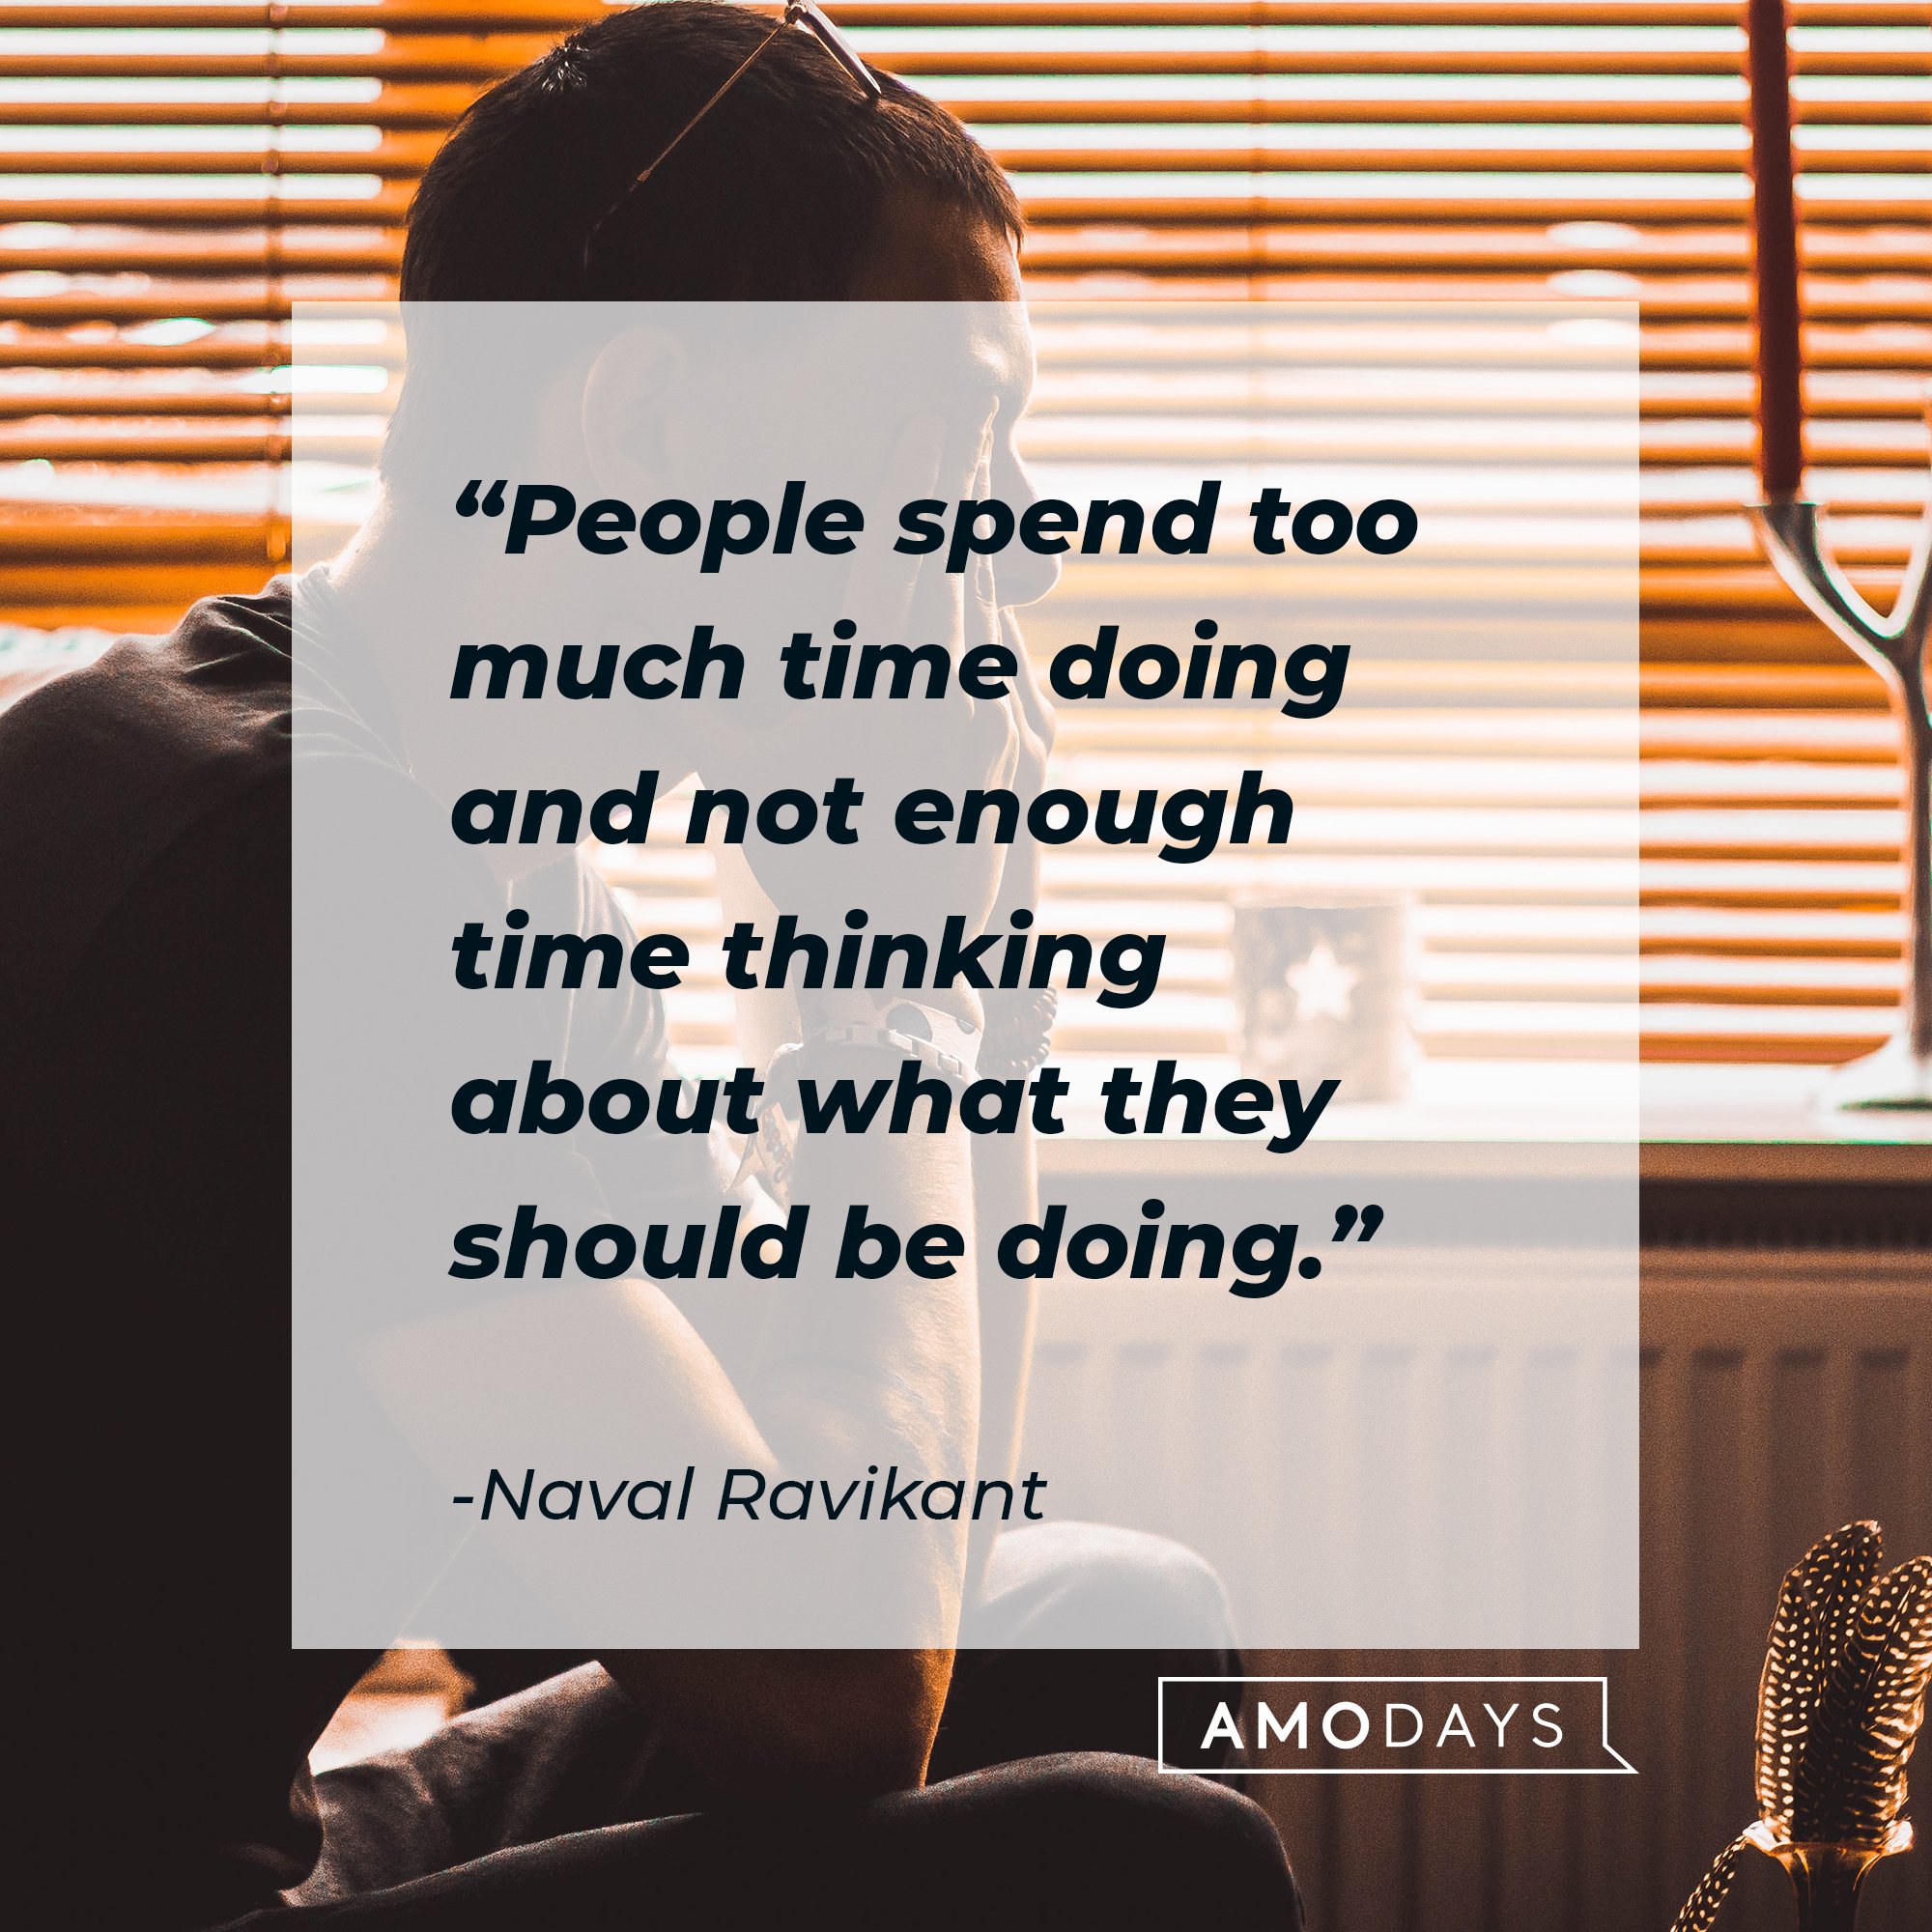 Naval Ravikant's quote: People spend too much time doing and not enough time thinking about what they should be doing. | Image: AmoDays